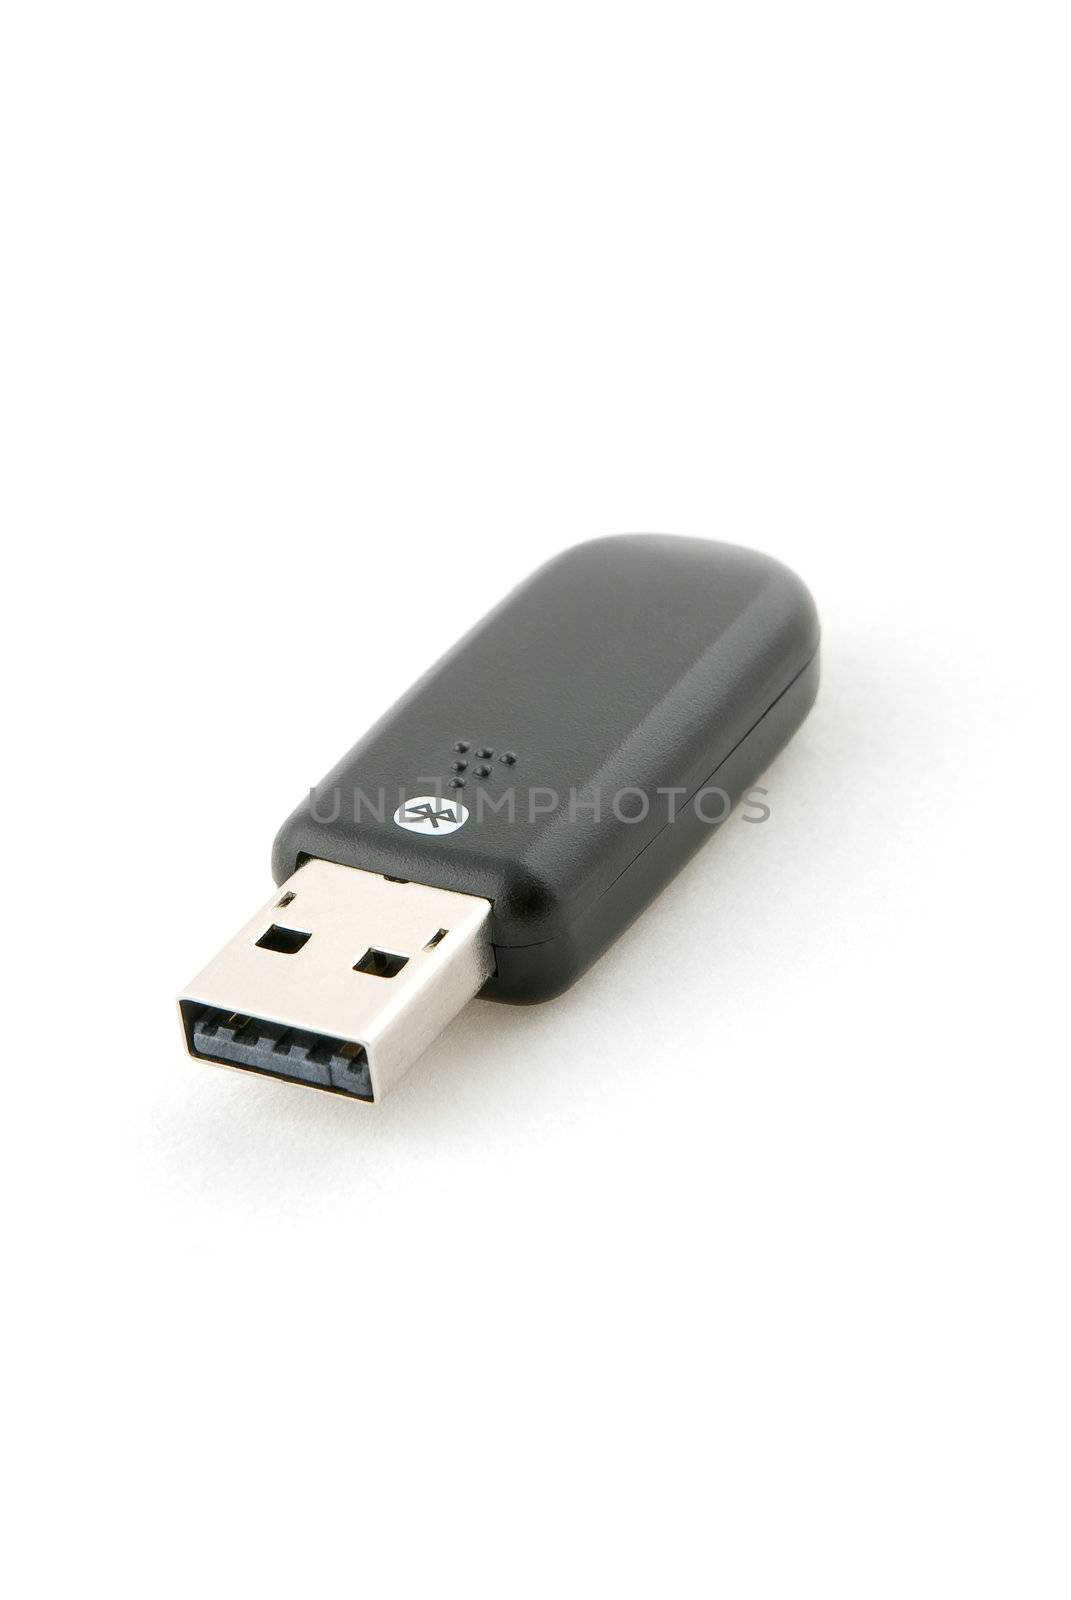 USB Bluetooth dongle by Real4to